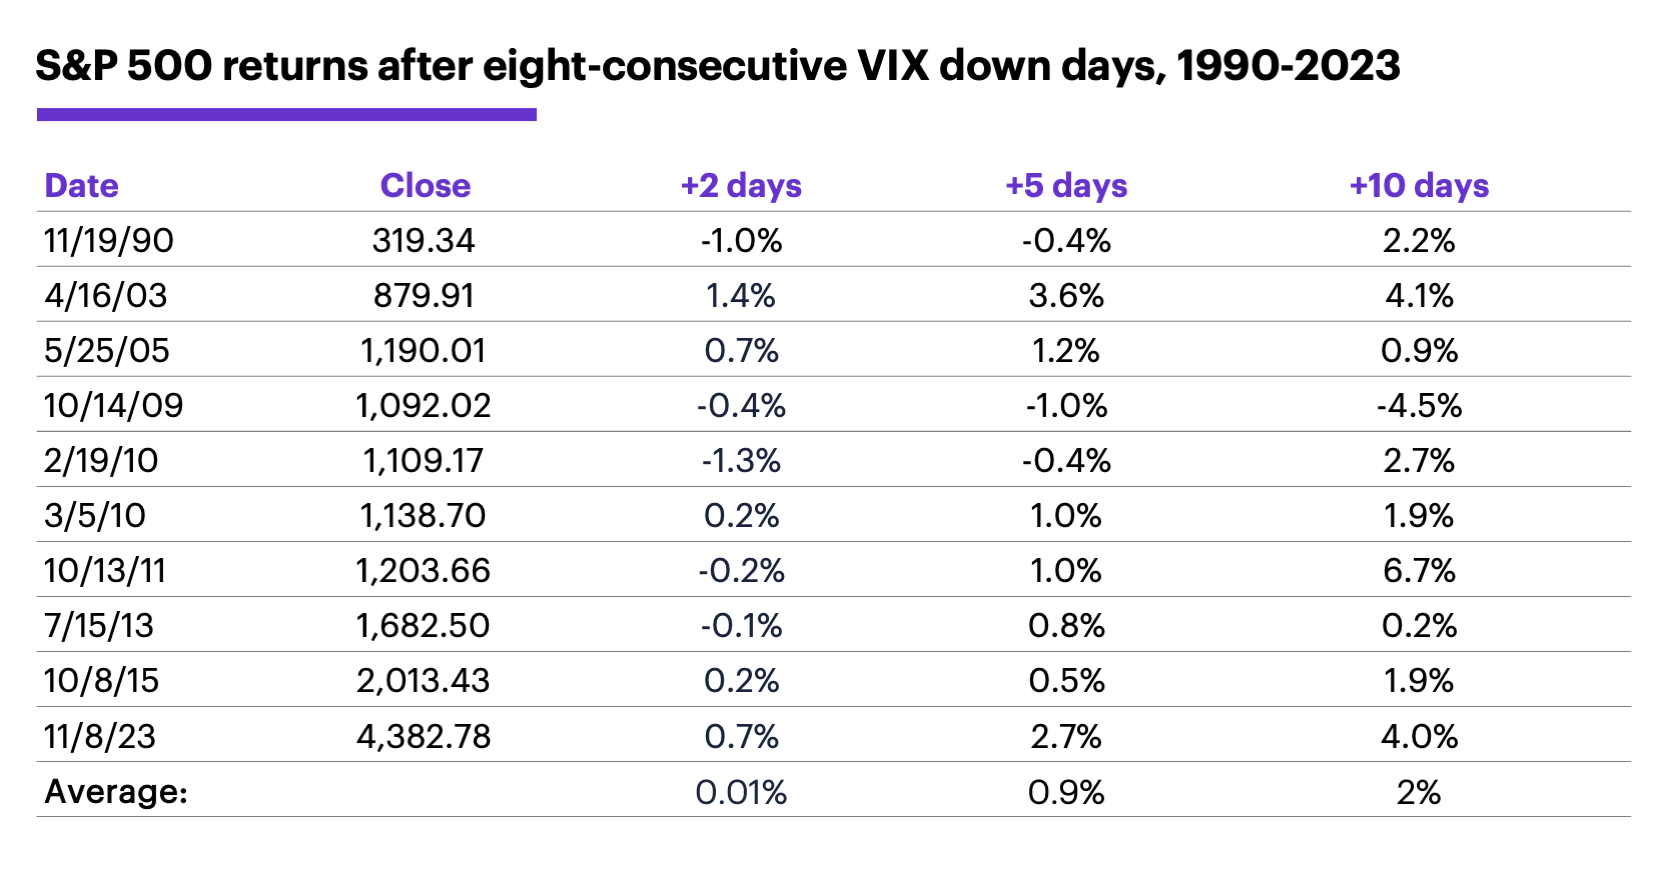 S&P 500 average returns after eight-straight VIX down days, 1990-2023